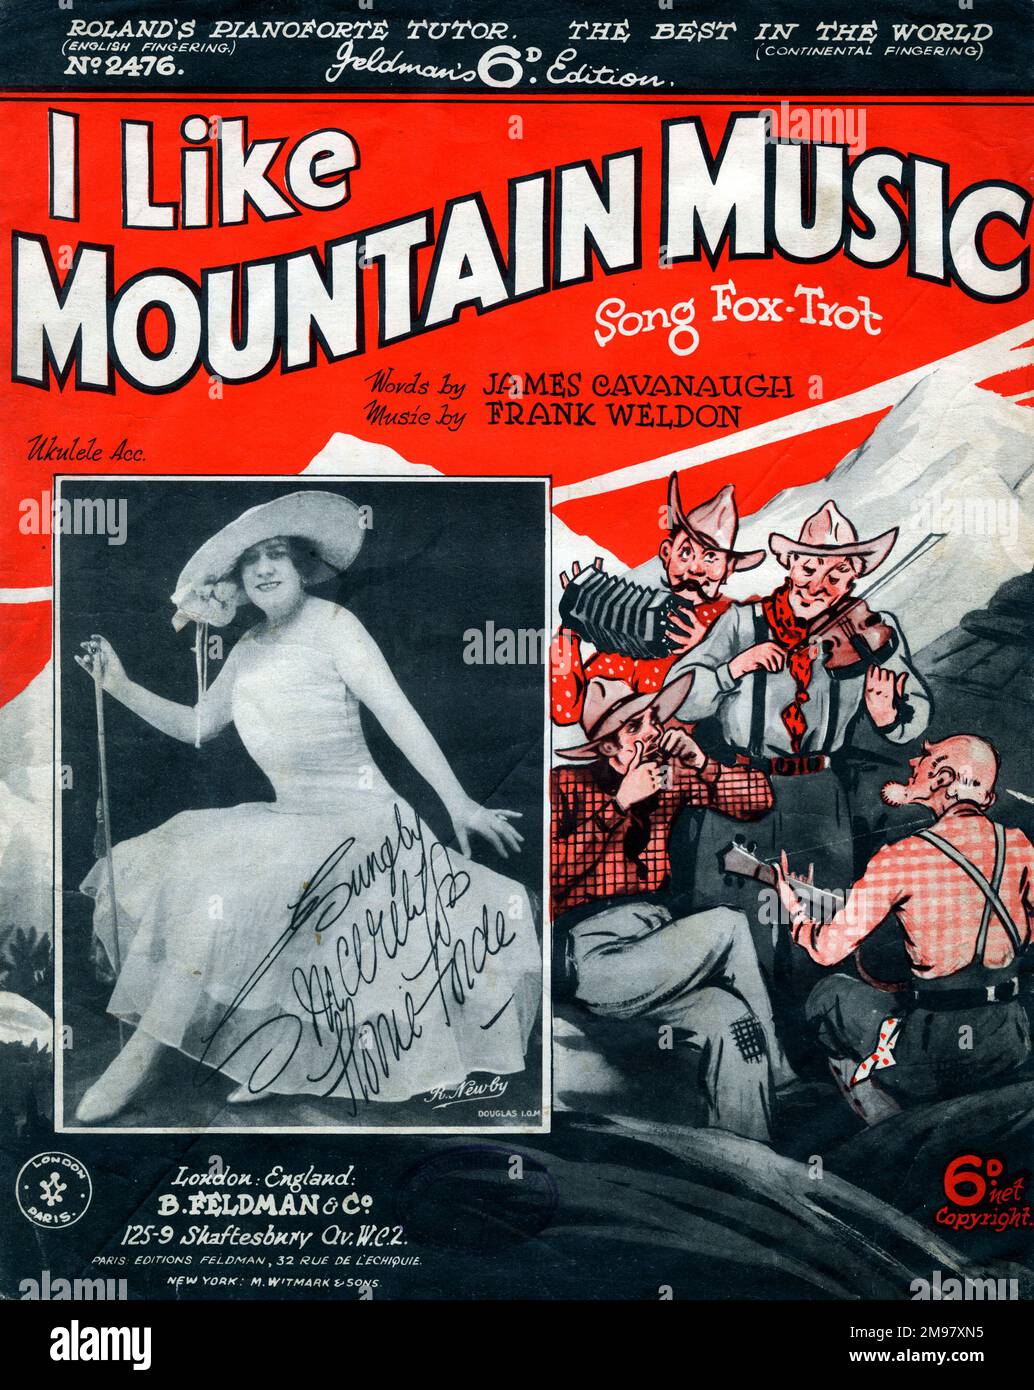 Music cover, I Like Mountain Music, fox trot song, words by James Cavanaugh, music by Frank Weldon. With a signed photo of Florrie Forde, music hall singer. Stock Photo